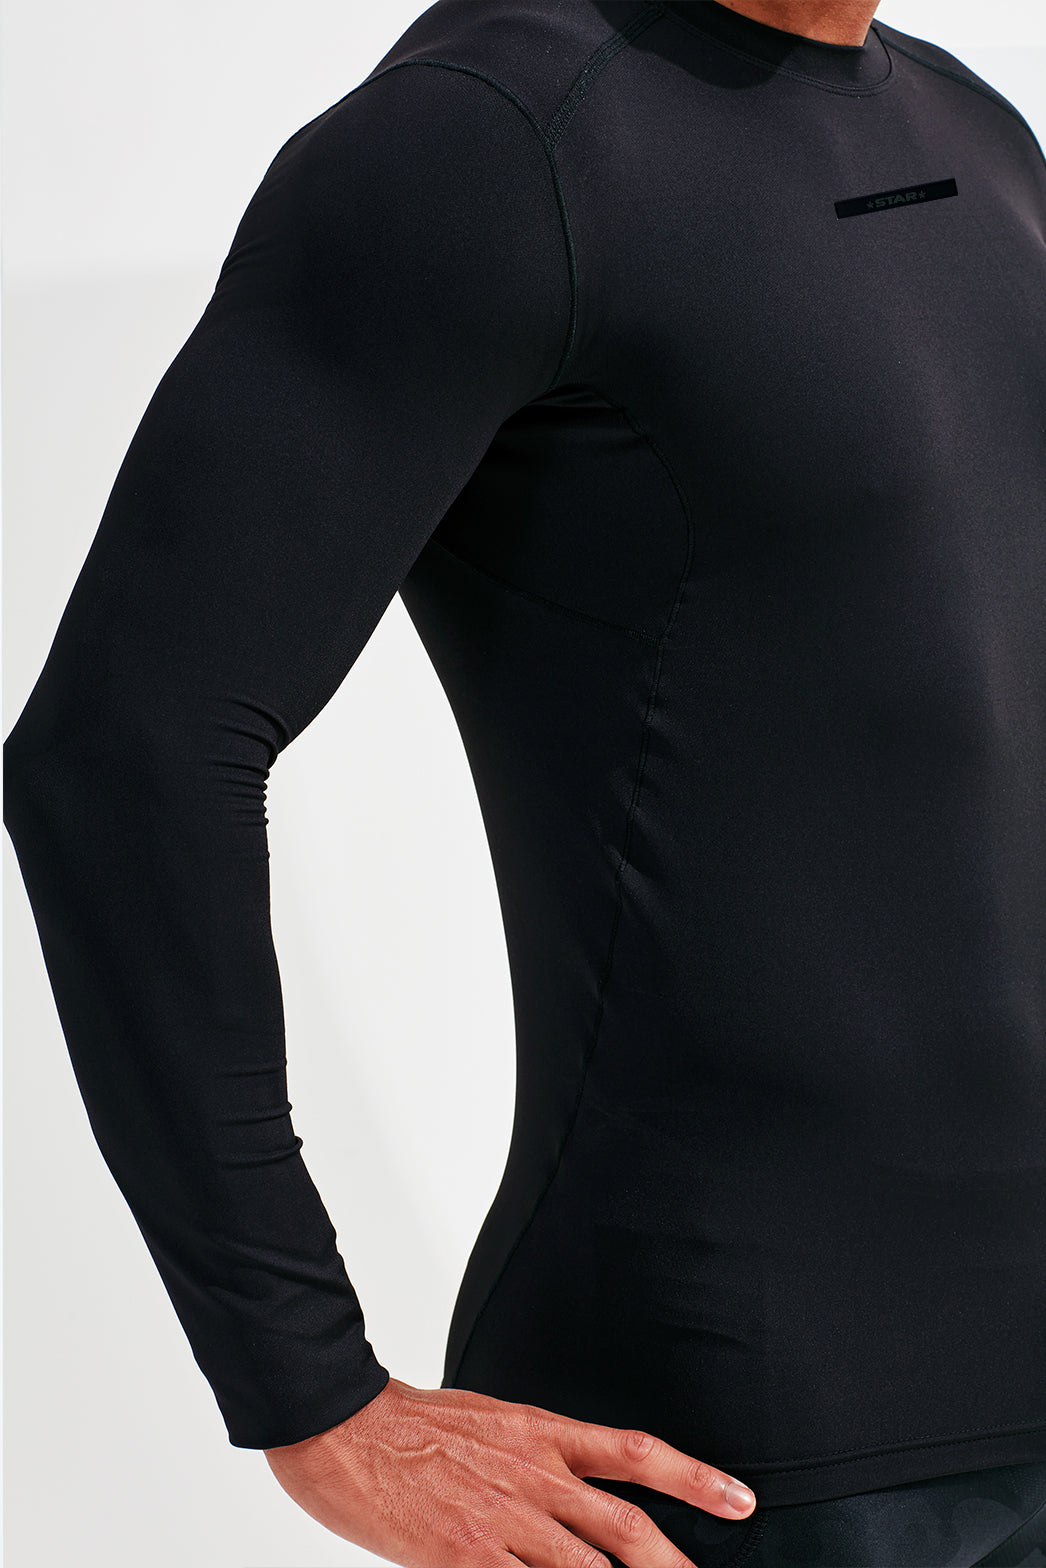 STAR® baselayer Dominate the Sand in Style!